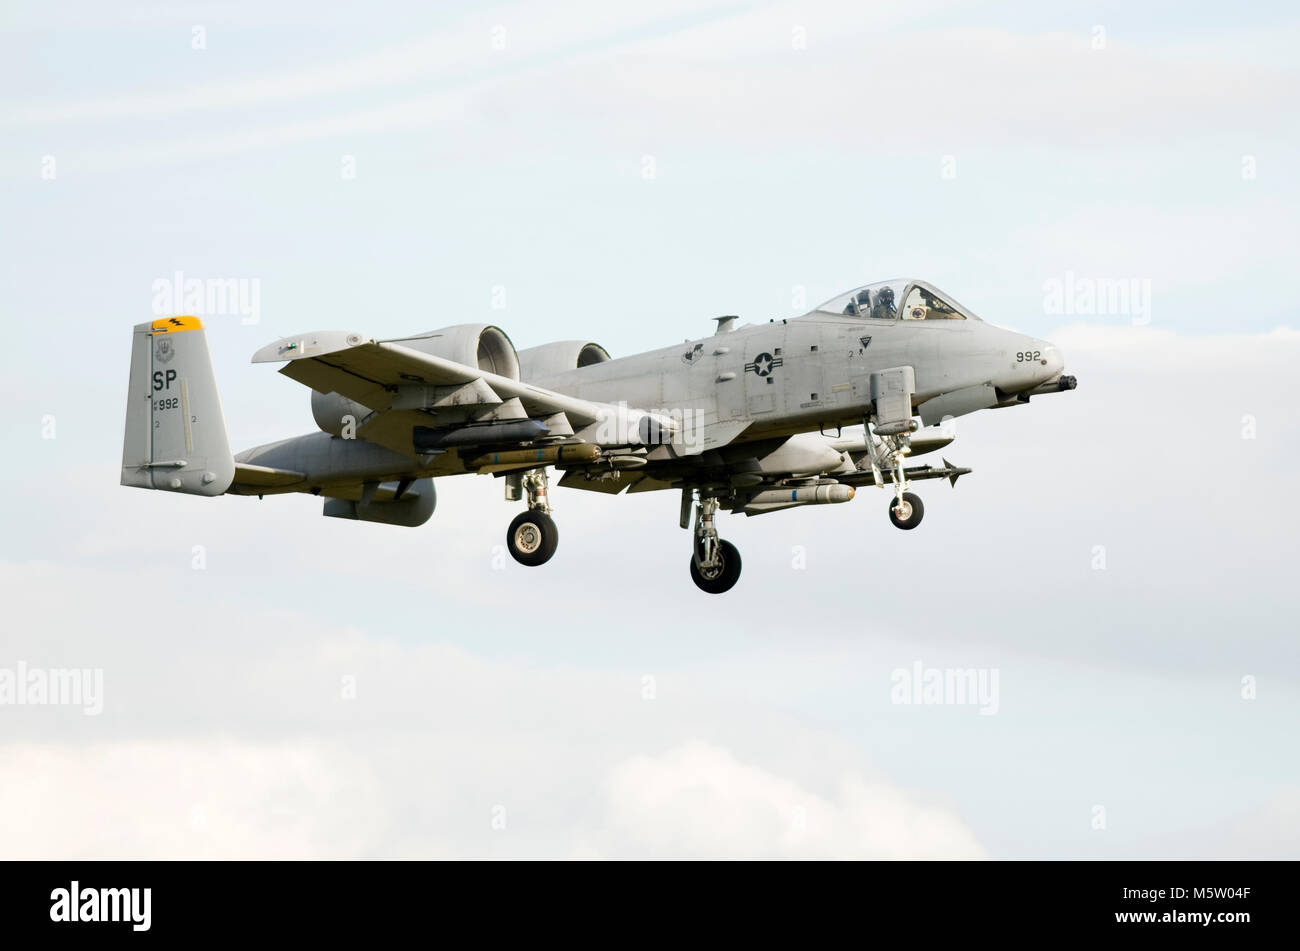 Fairchild Republic A-10C Warthog, 81-0992, of the 81st FS, 52nd FW, USAFE, based at Spangdahlem AB, Germany, seen on final approach to RAF Lakenheath Stock Photo